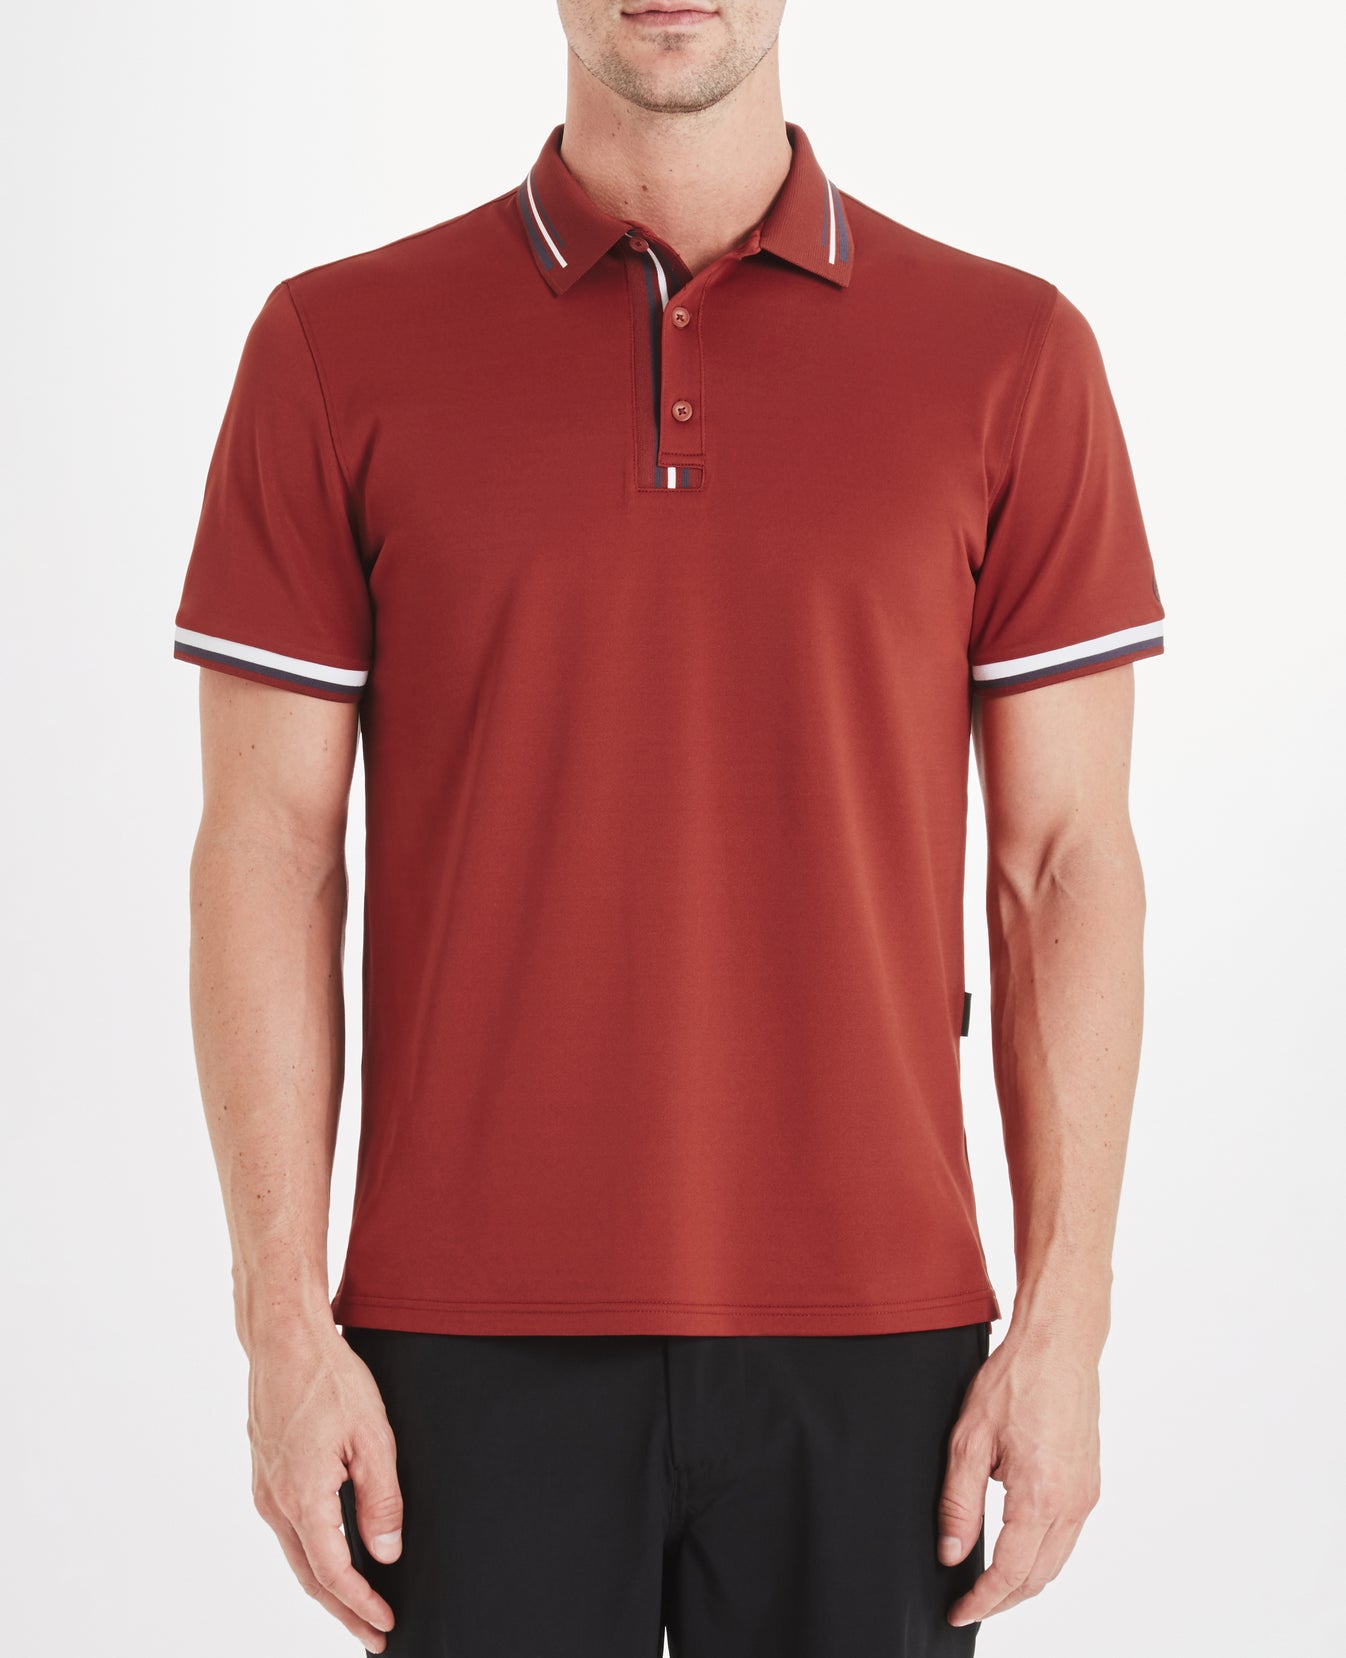 The Overland Polo Barn Red Mens Top Photo 1